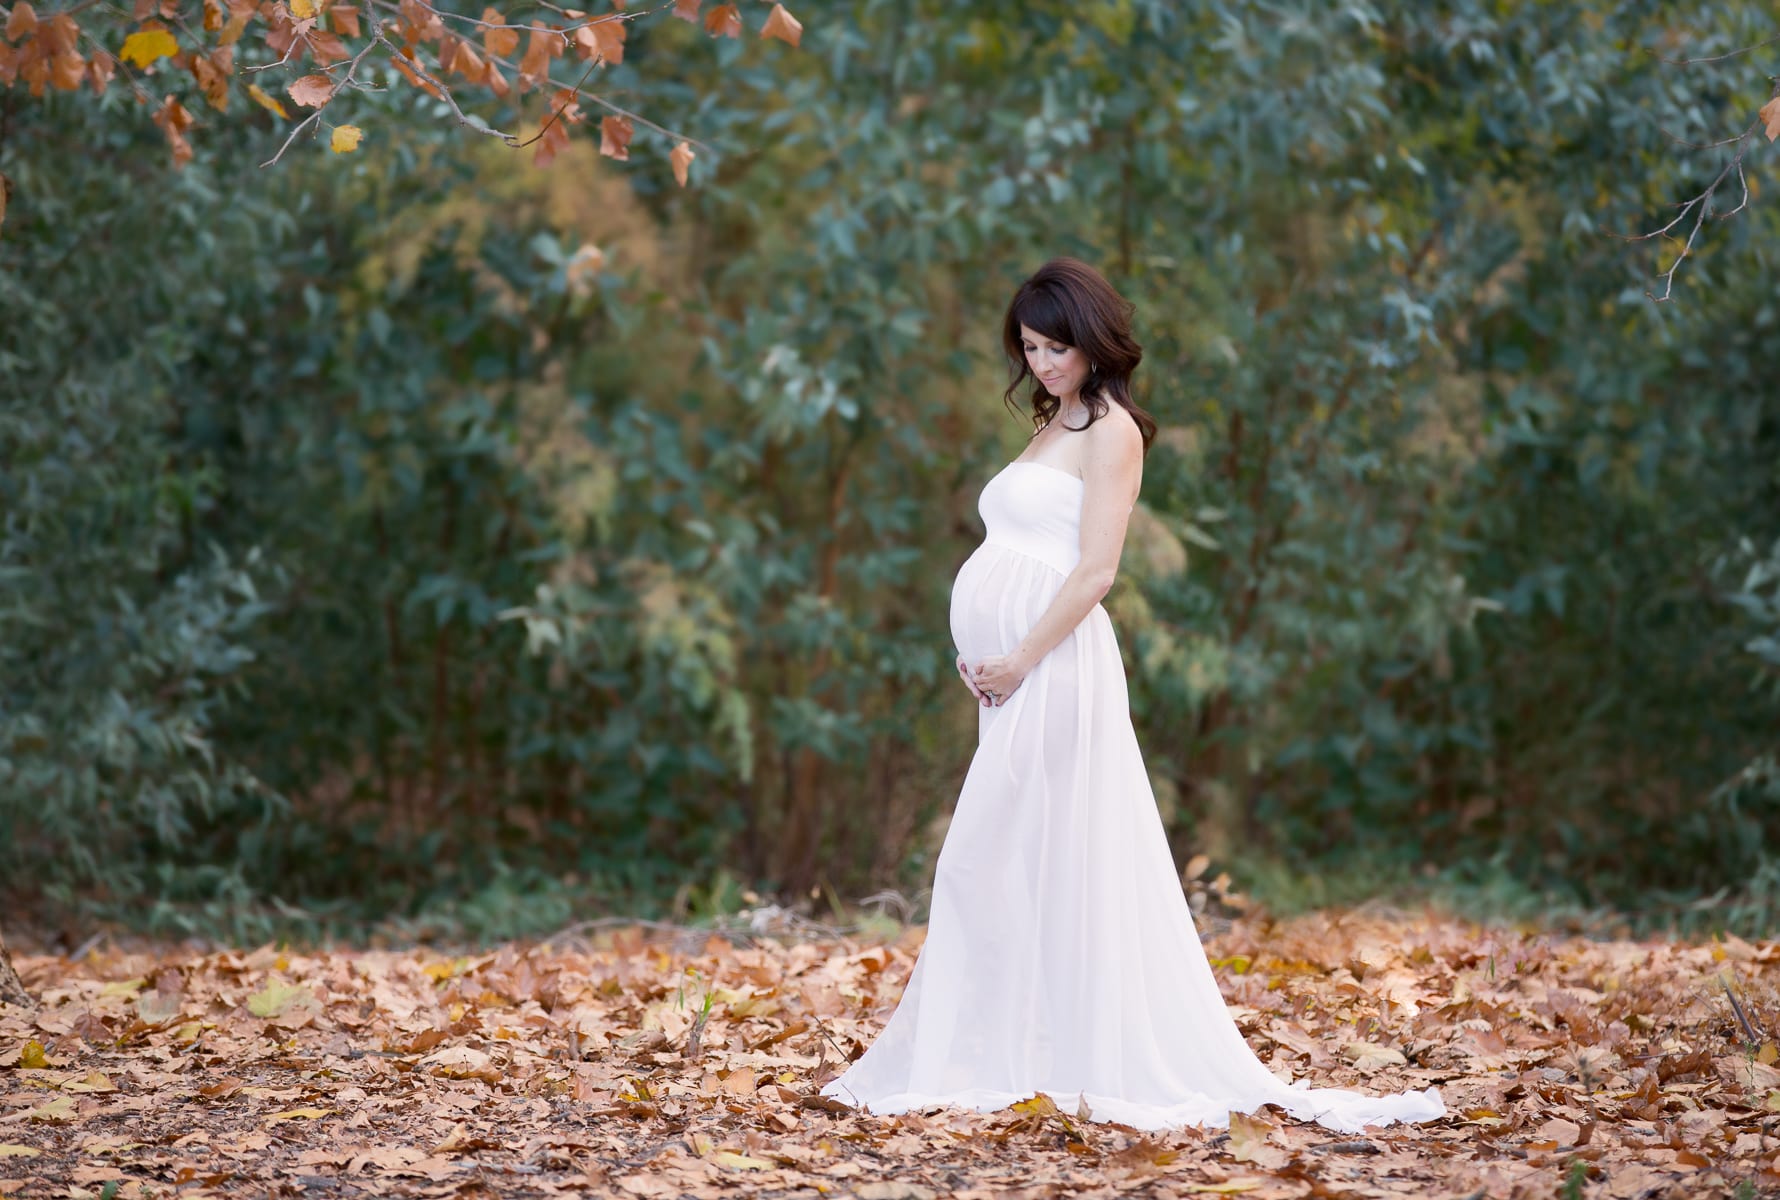 Temecula Maternity Photographer Gretchen Barros Photography Cream Dress looking down